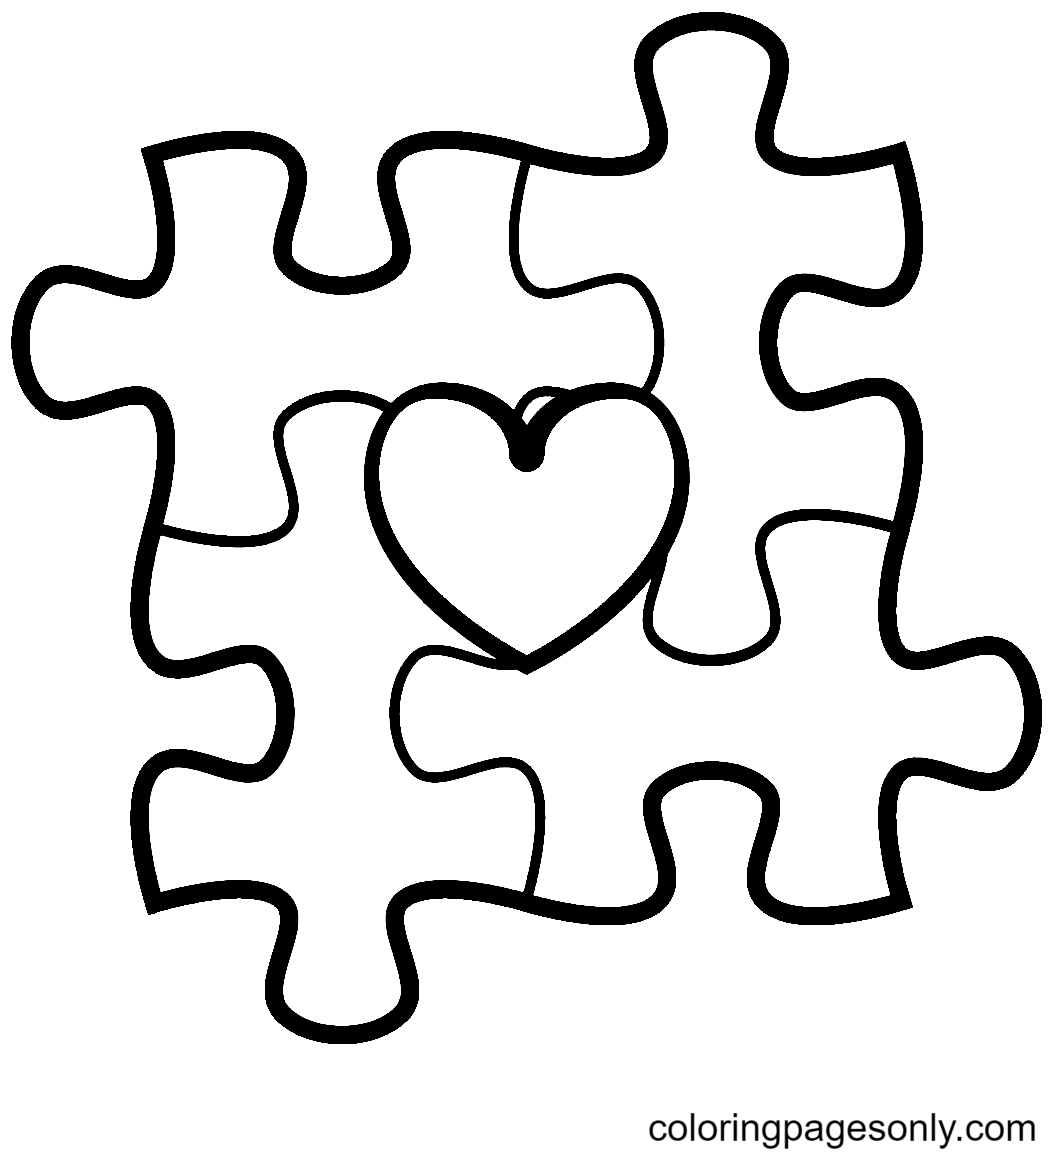 Autism Awareness Puzzle Pieces with Heart Coloring Pages - Autism Awareness Coloring  Pages - Coloring Pages For Kids And Adults